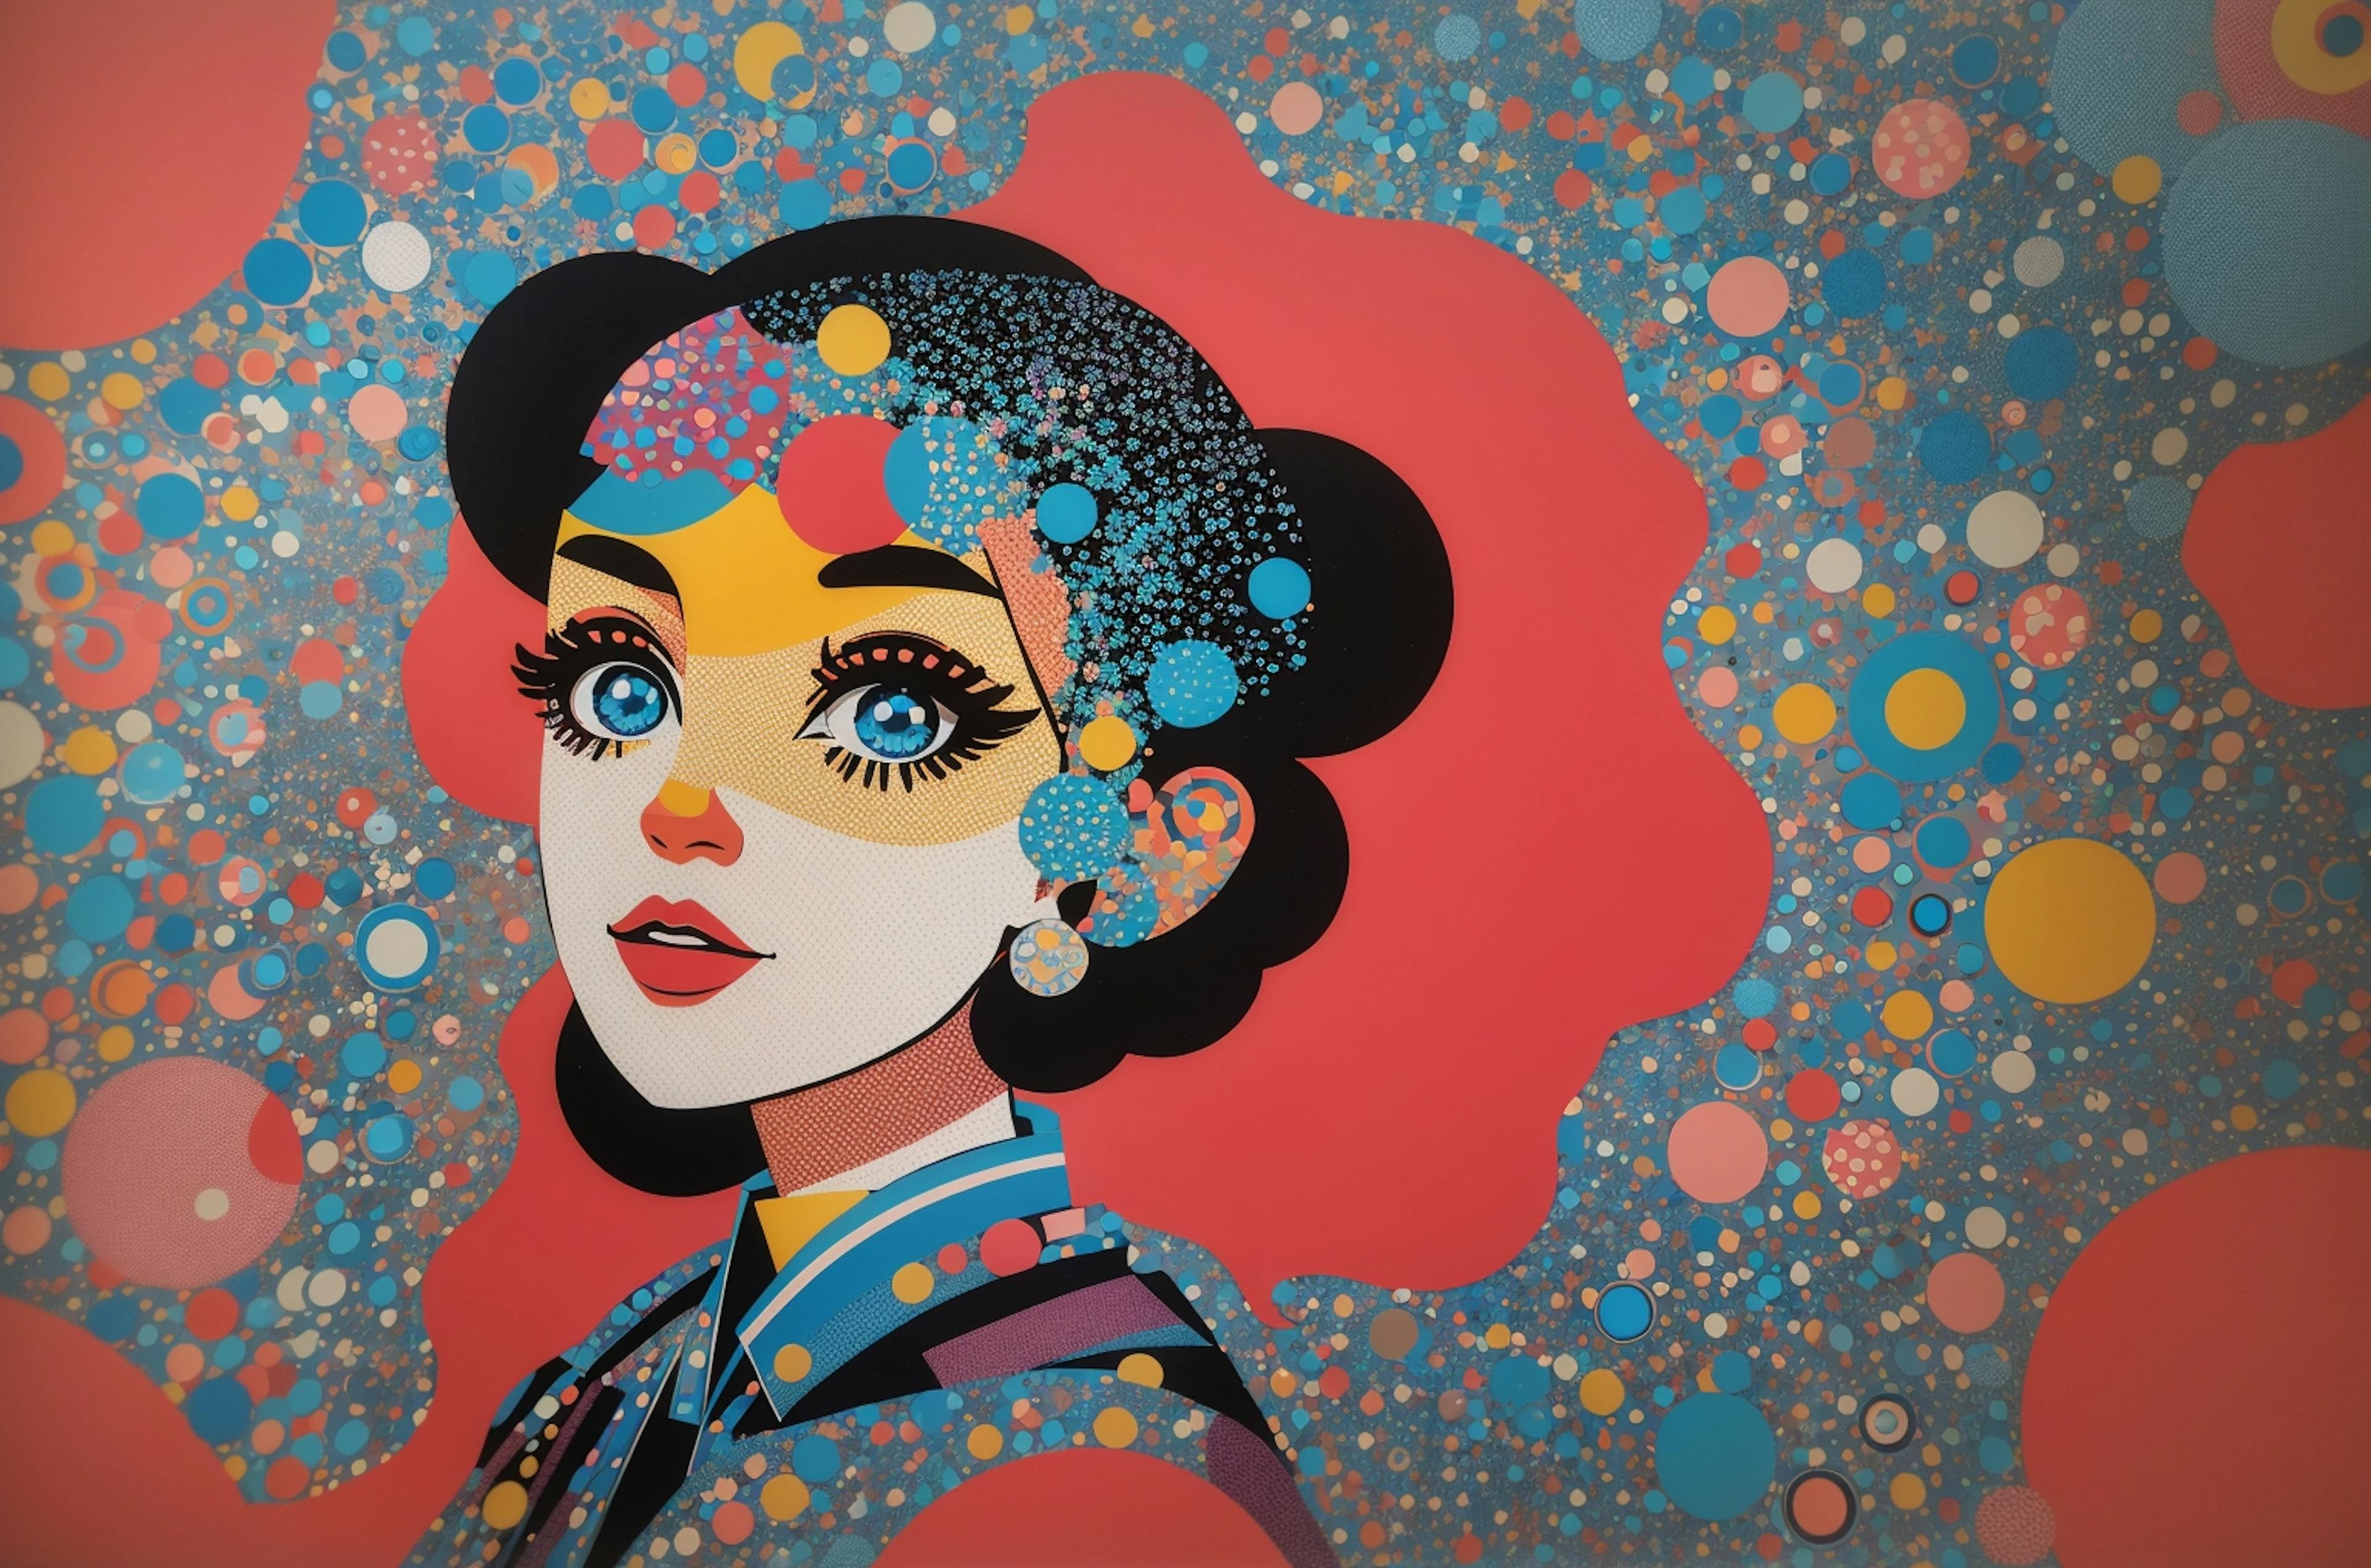 image of a portrait of a cartoon woman with lots of colors and dots surrounding her head. primarily reds, yellows, and blues